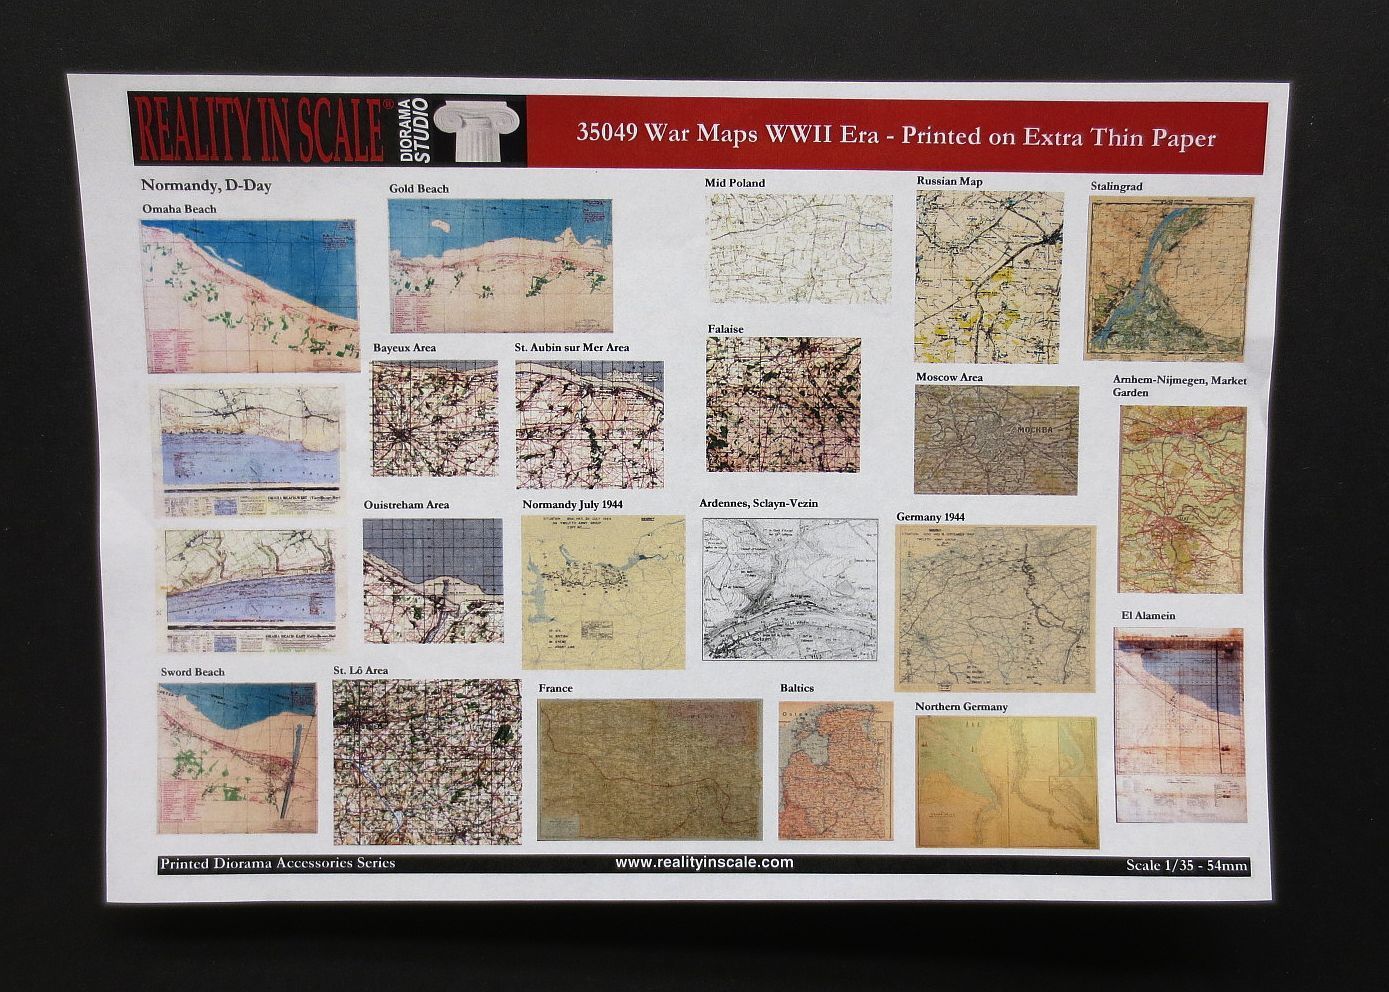 War Maps WWII - Printed on extra Thin Paper